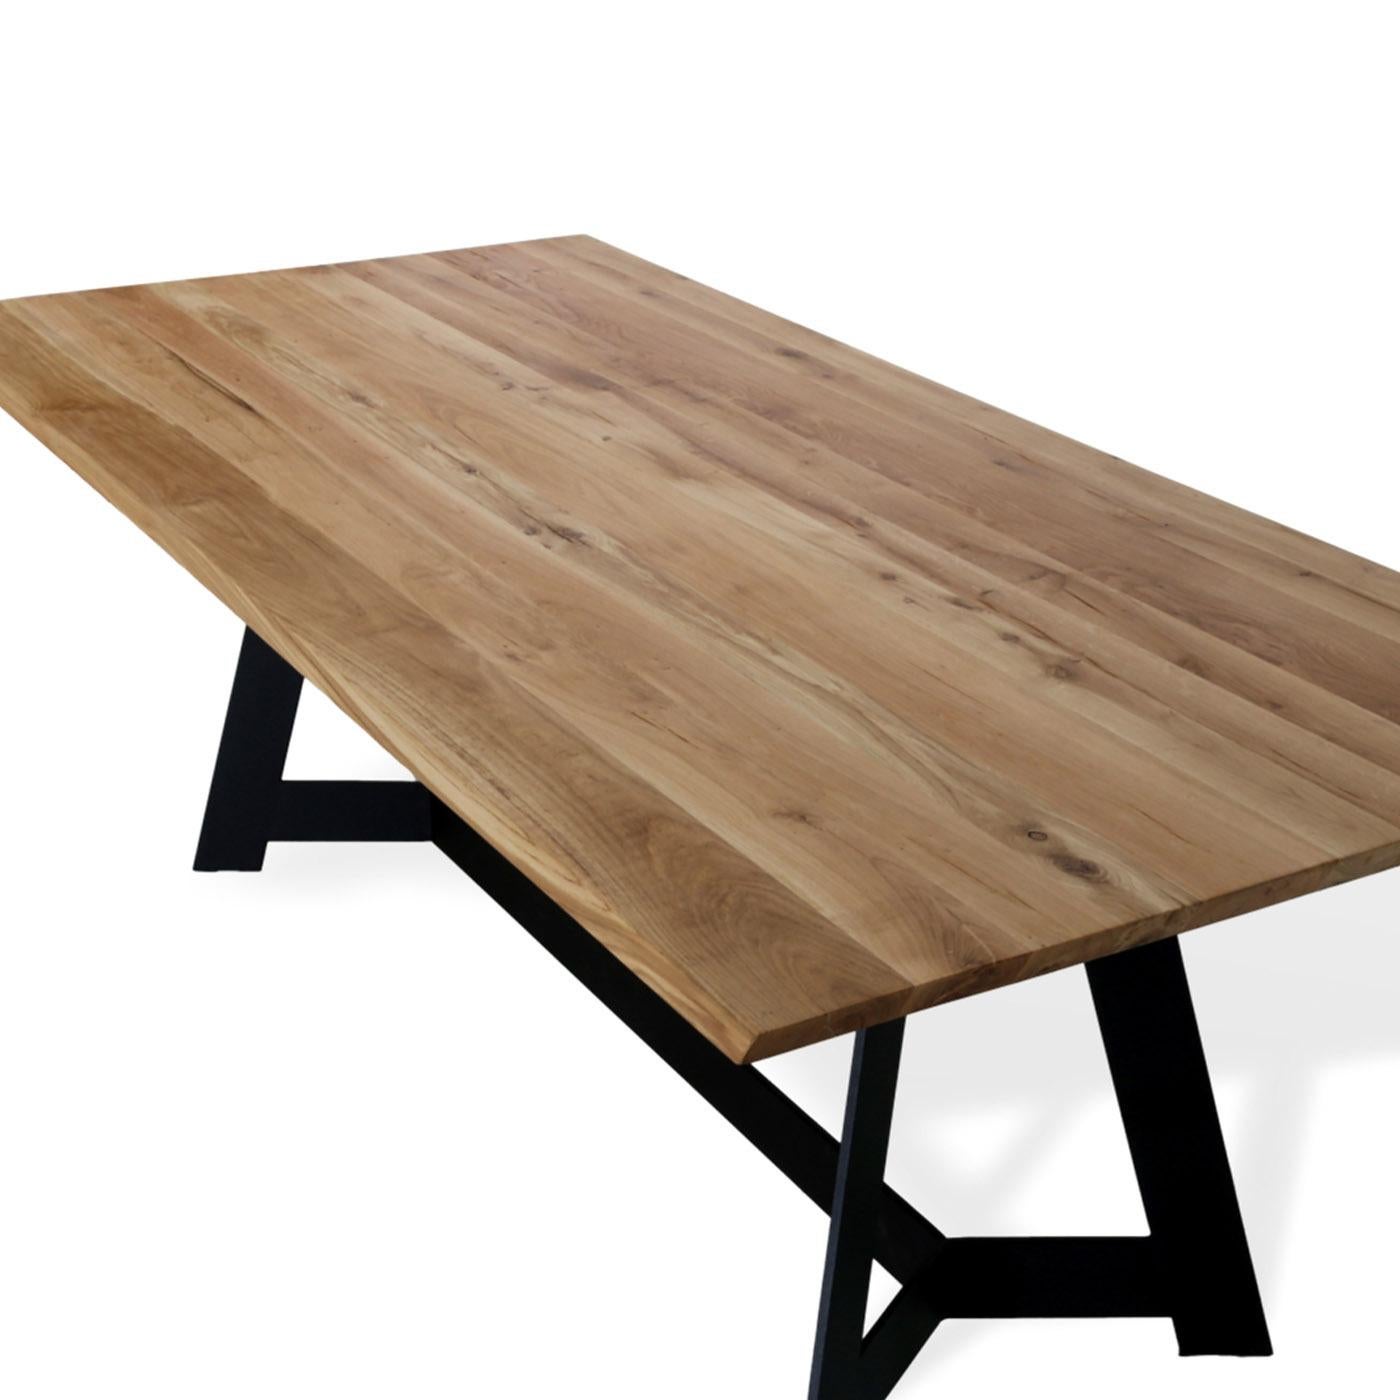 An exceptional definition of urban-minimalist style, this superb dining table will take center stage in a contemporary interior. Handcrafted of durmast wood with a clear natural finish, the top rests on a sturdy yet sleek black-lacquered metal base,